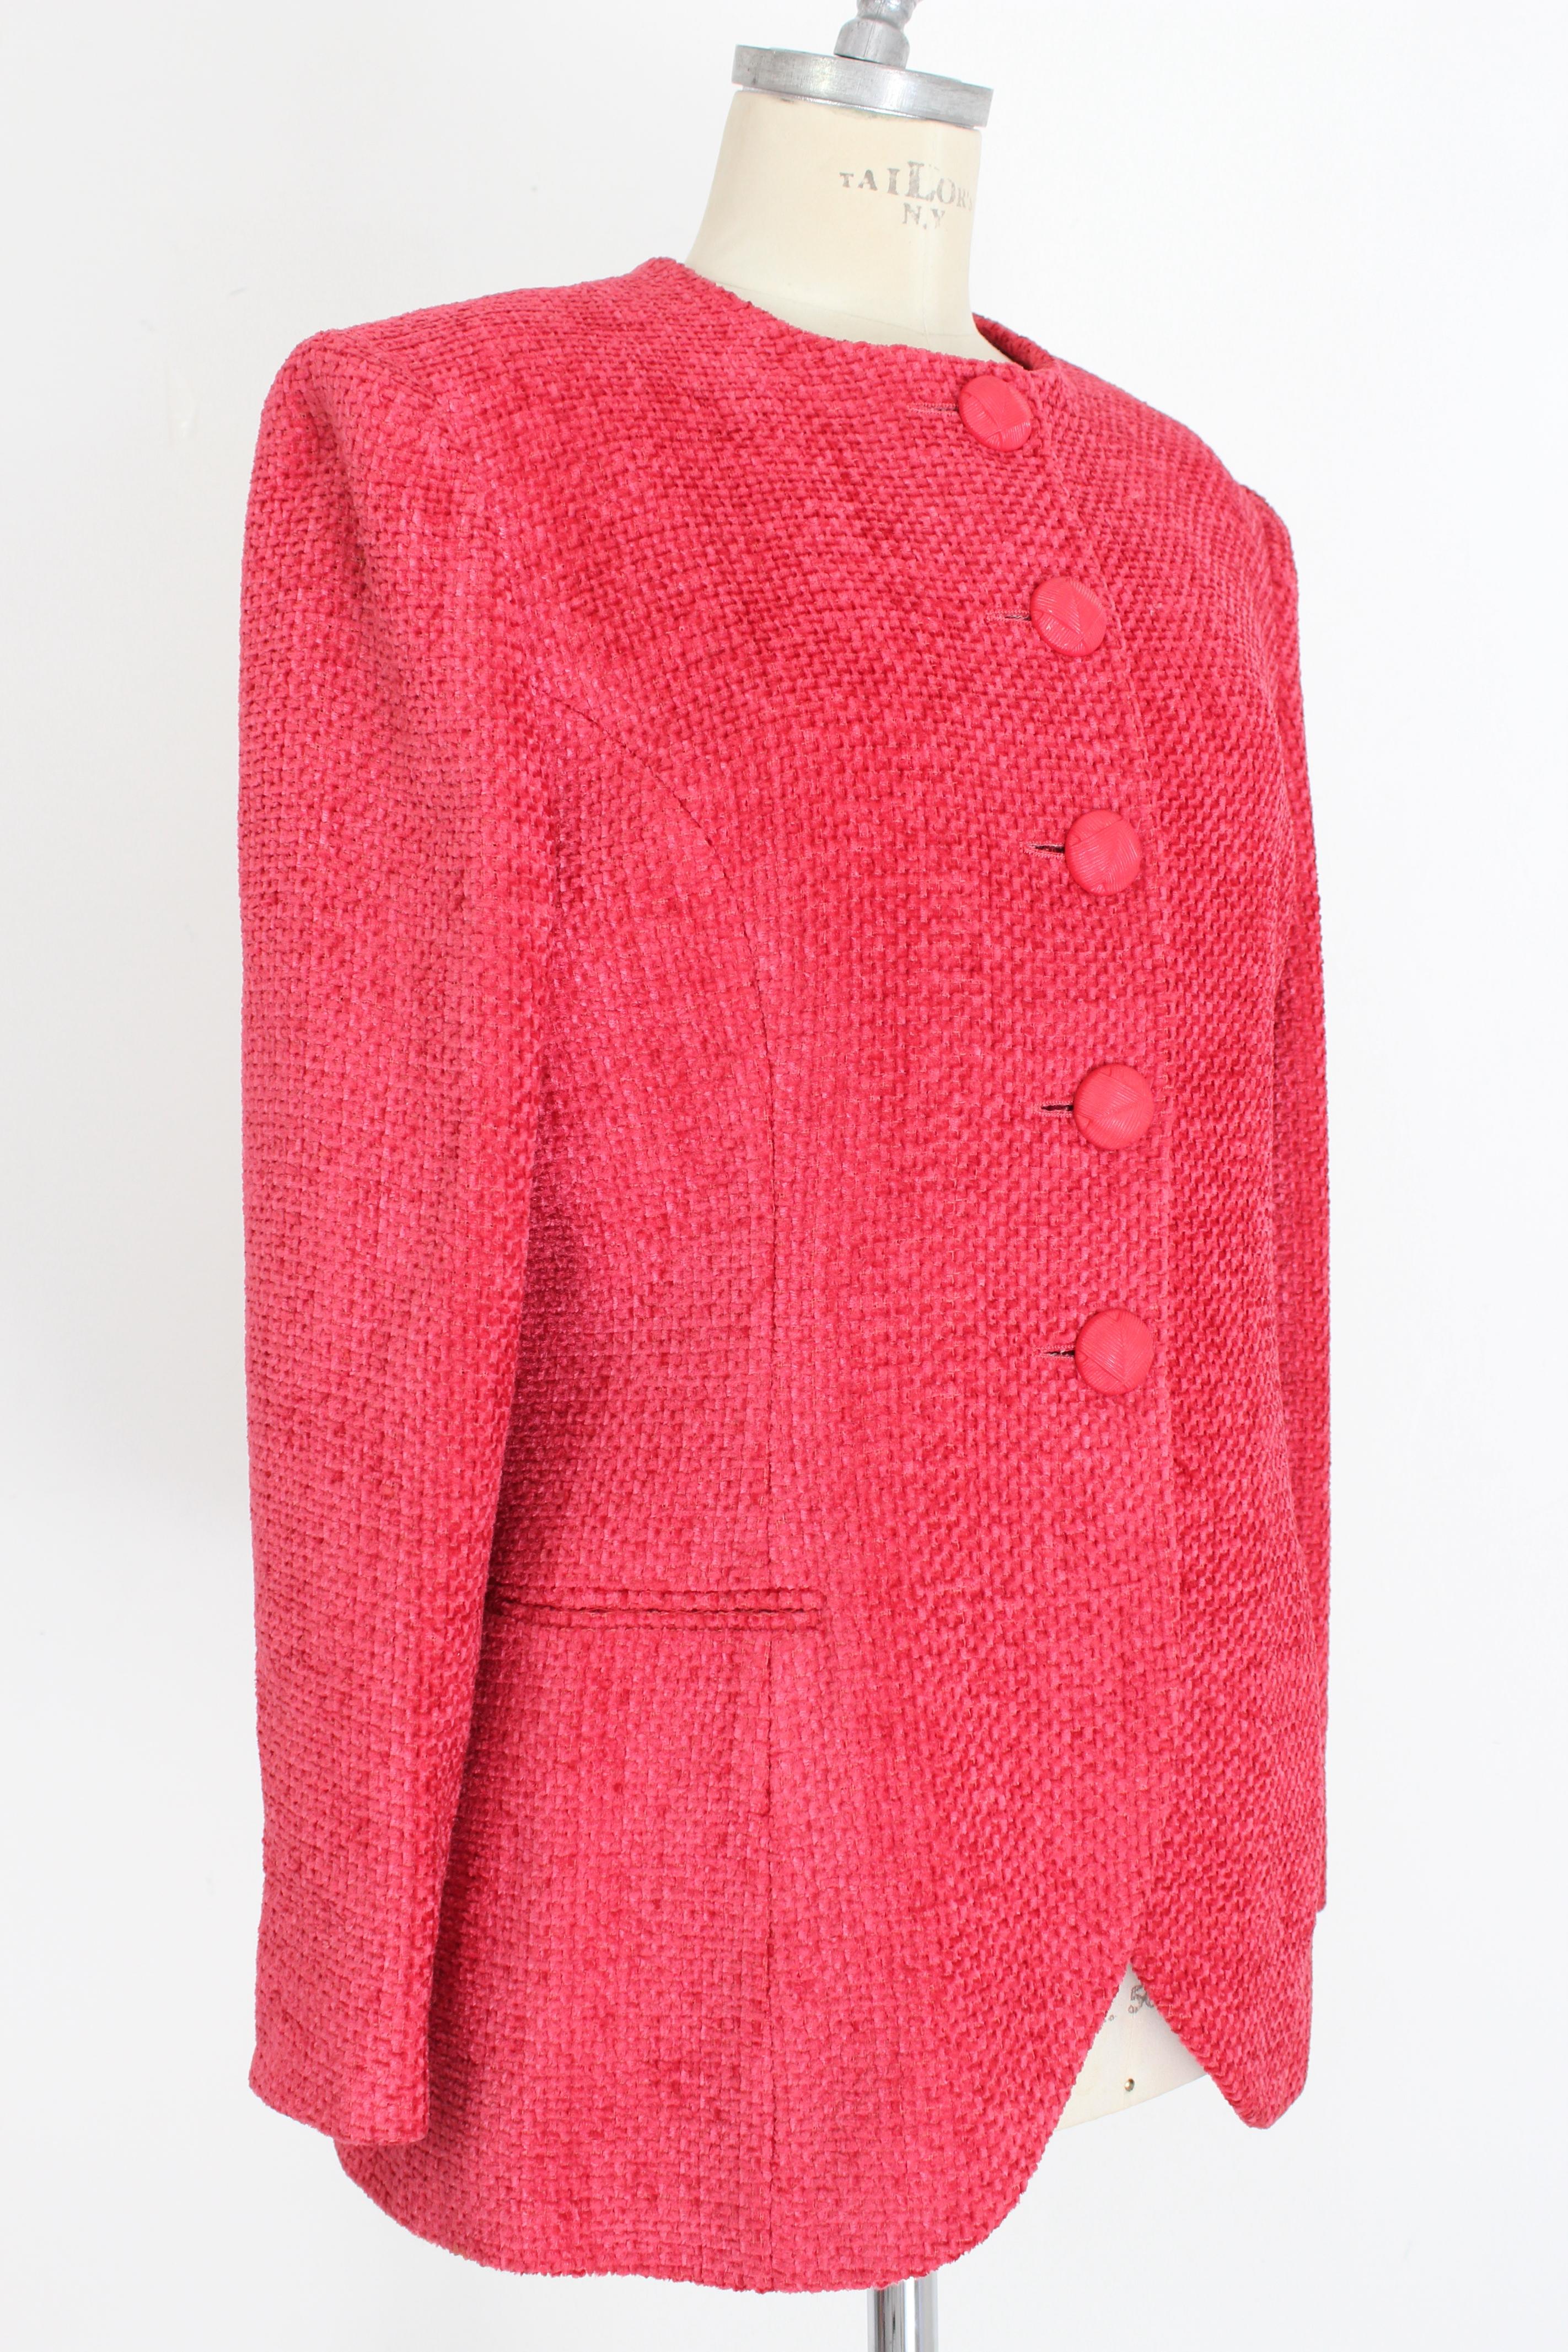 Women's Christian Dior Boutique Red Wool Boucle Evening Blazer 1980s